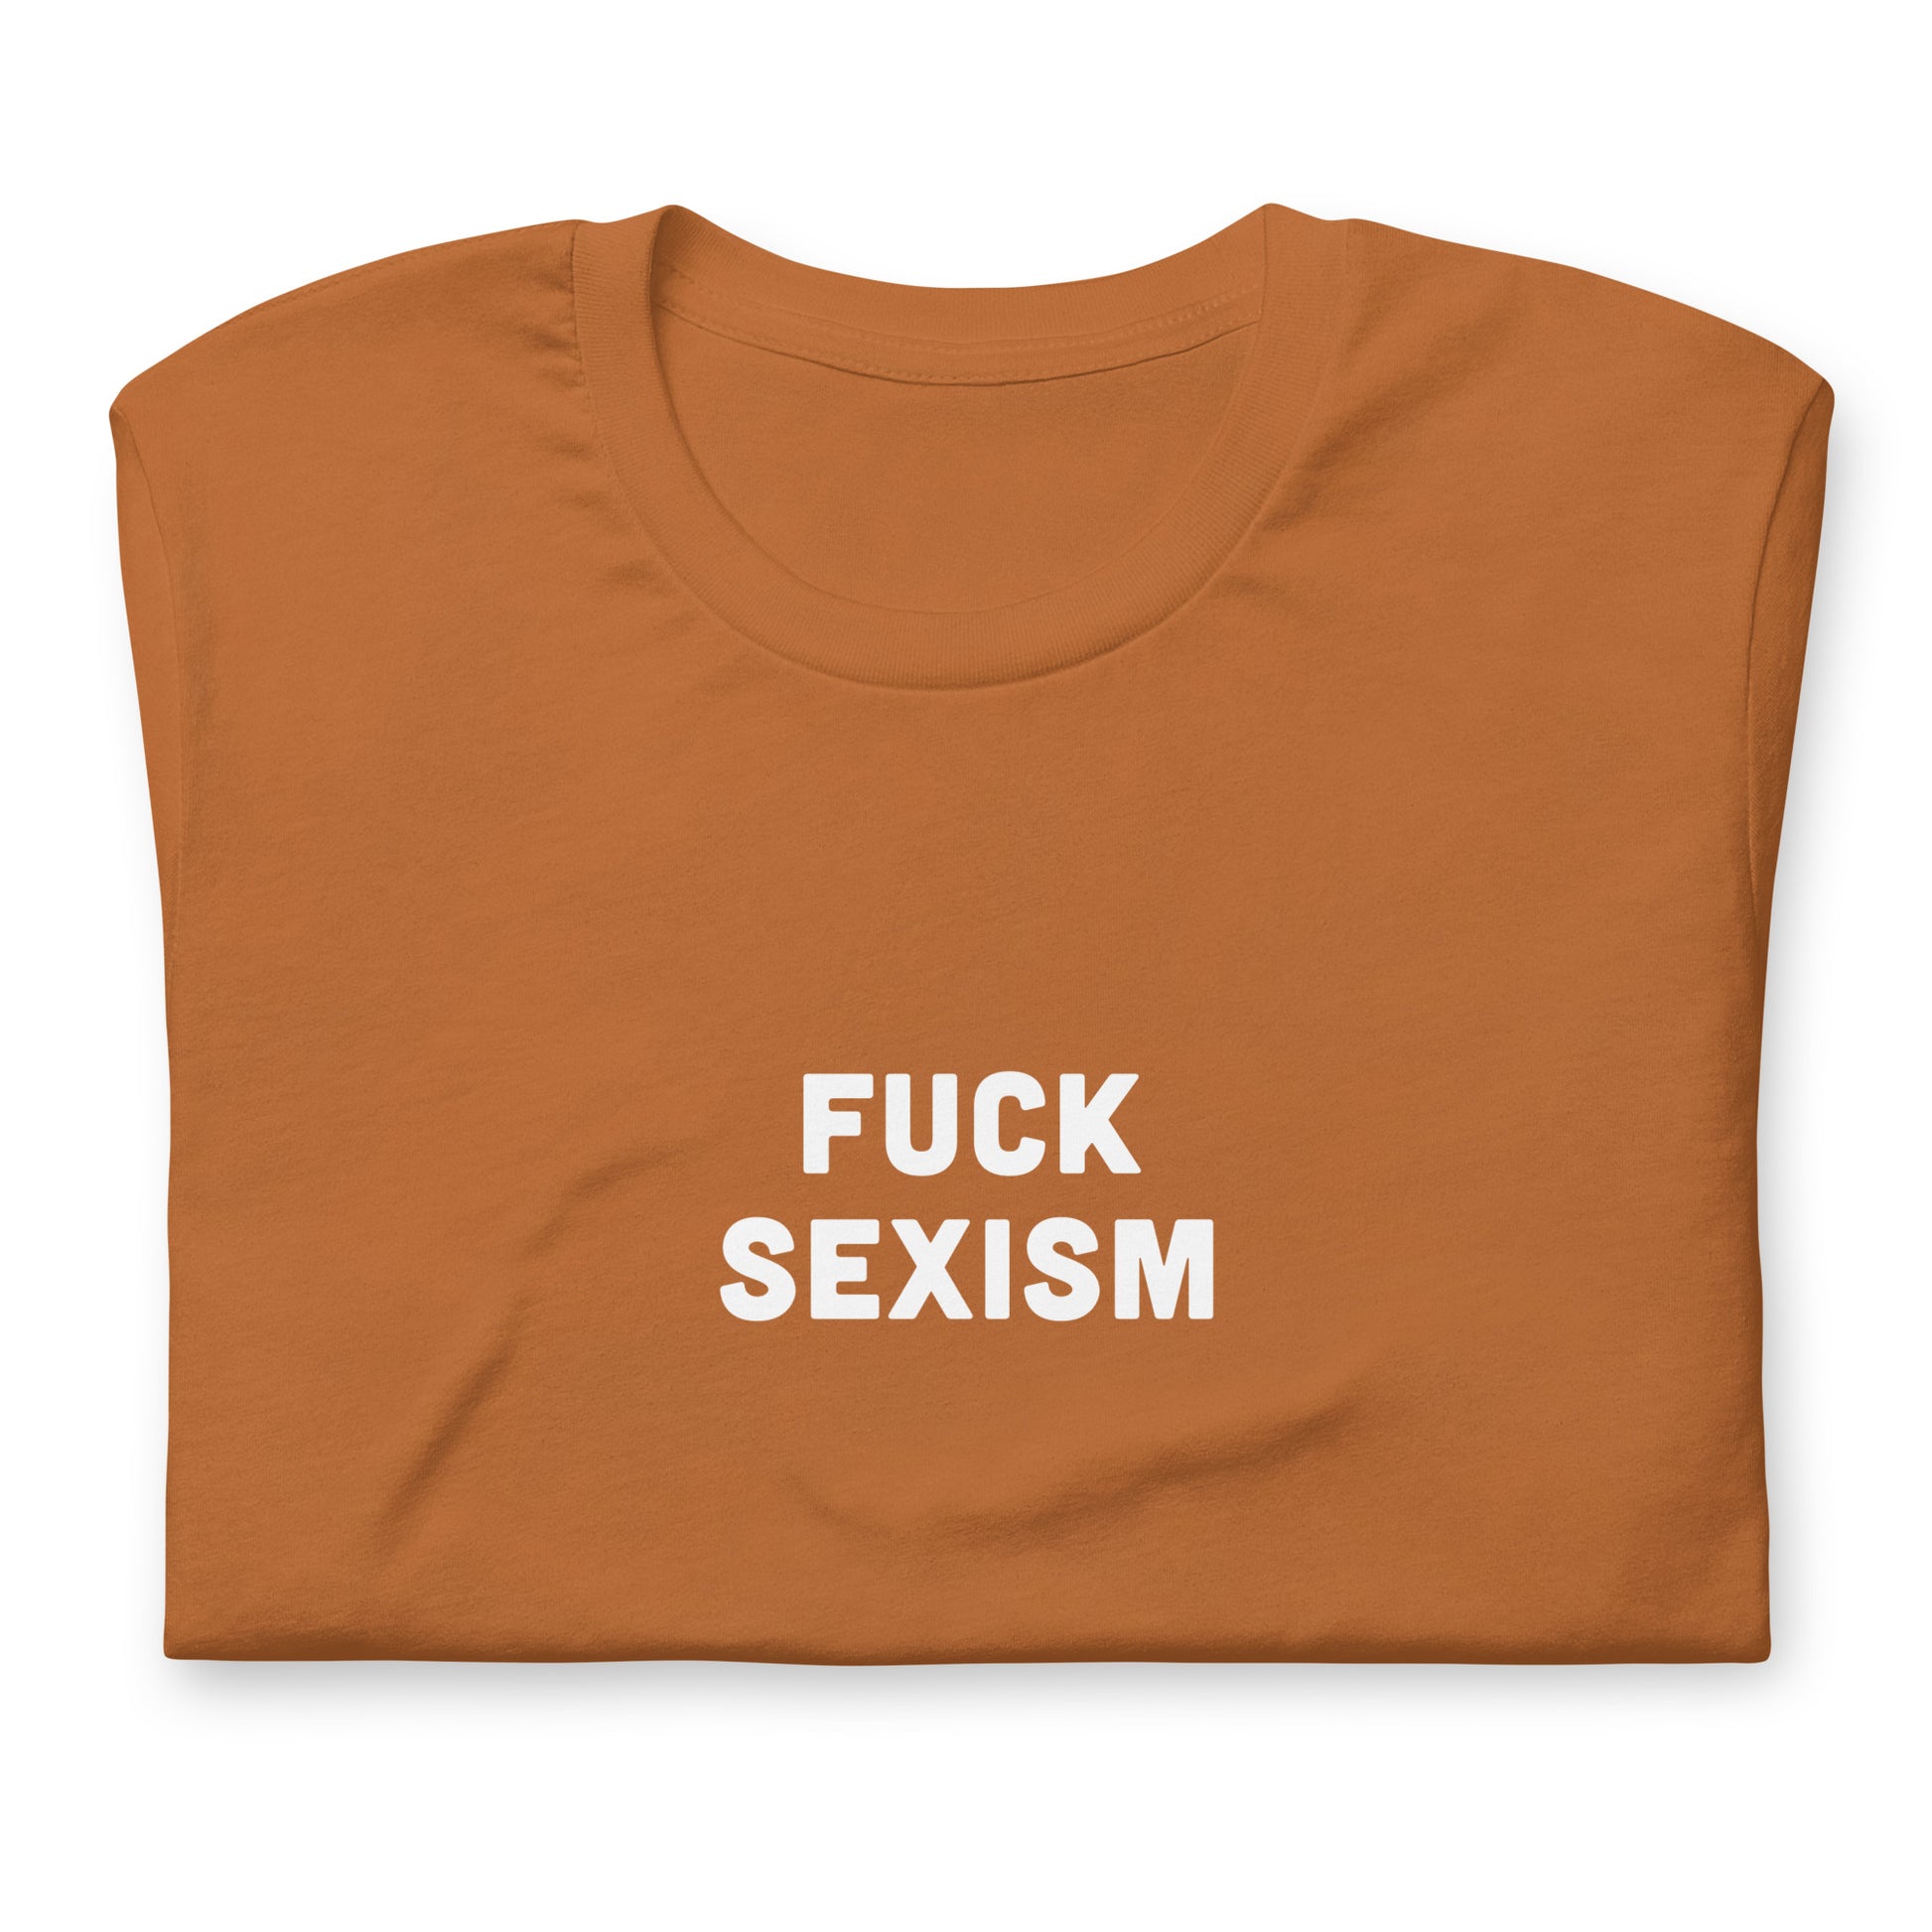 Fuck Sexism T-Shirt Size XL Color Navy